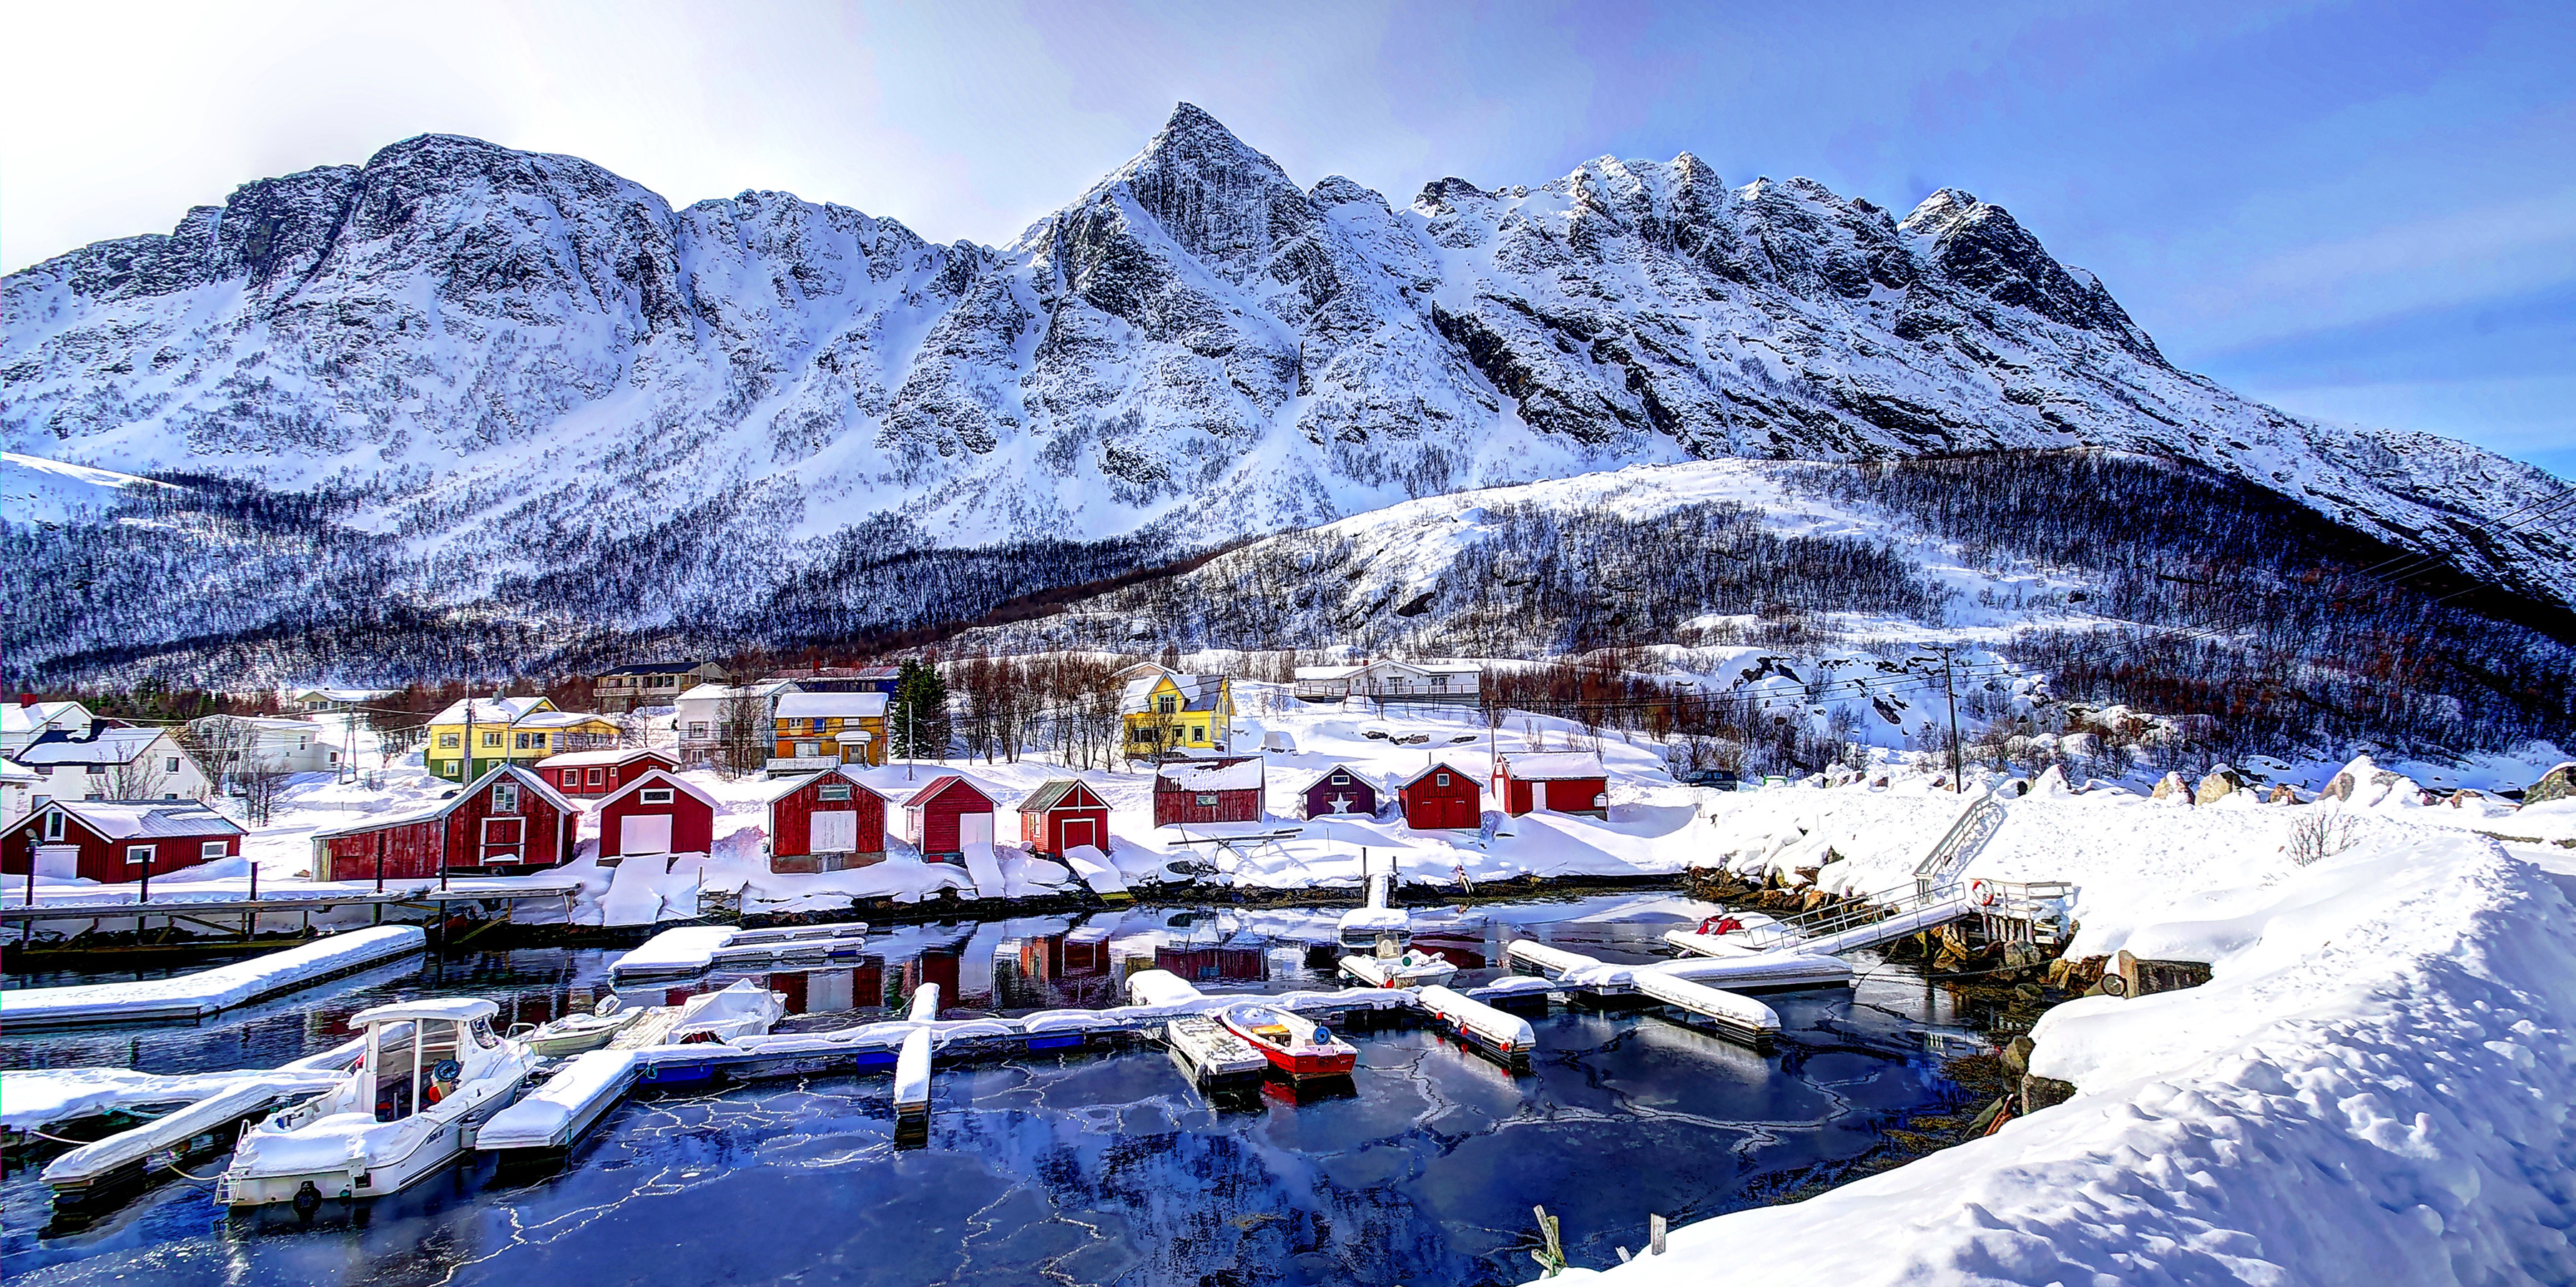 norway, mountains, cities, winter, snow, building, bay